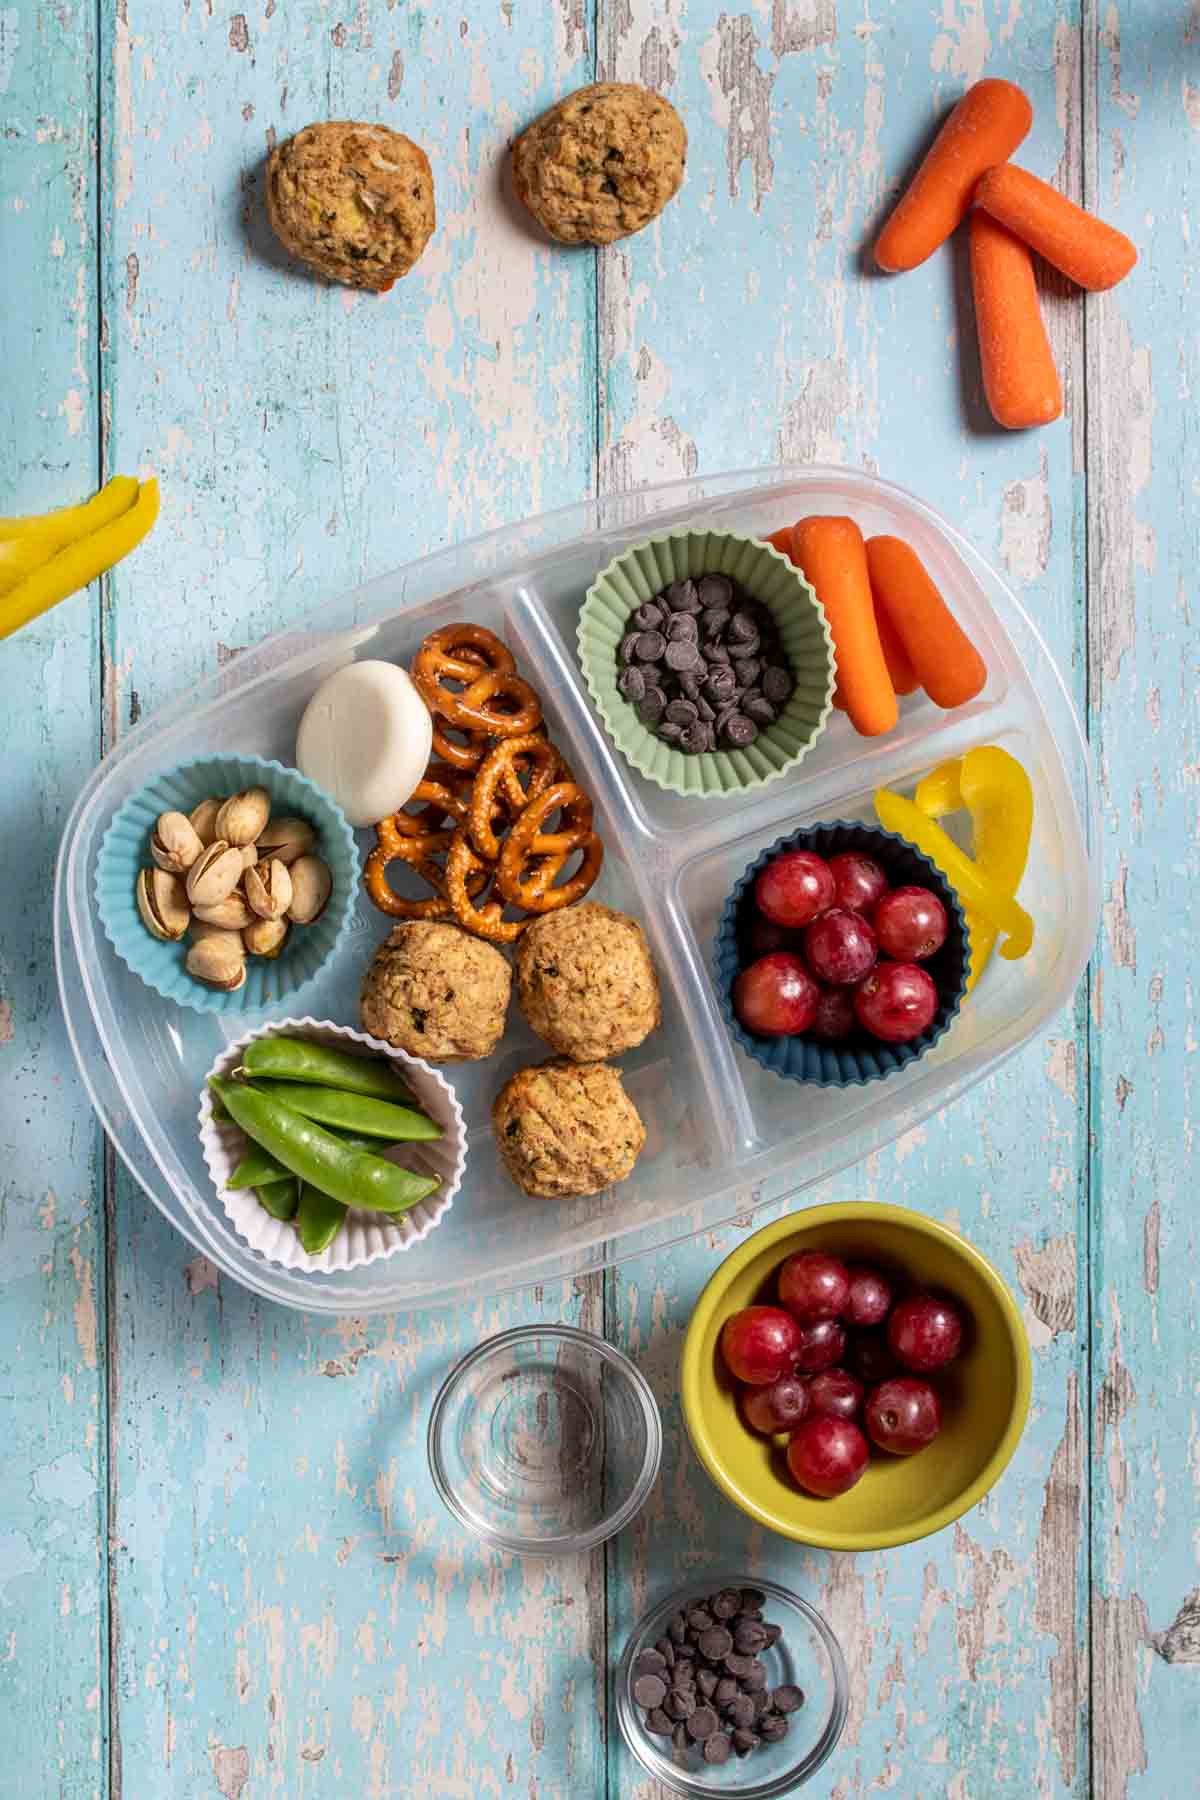 Top view of a container with sections filled with veggies, fruit, pretzels, nuts and protein balls on a light blue surface.